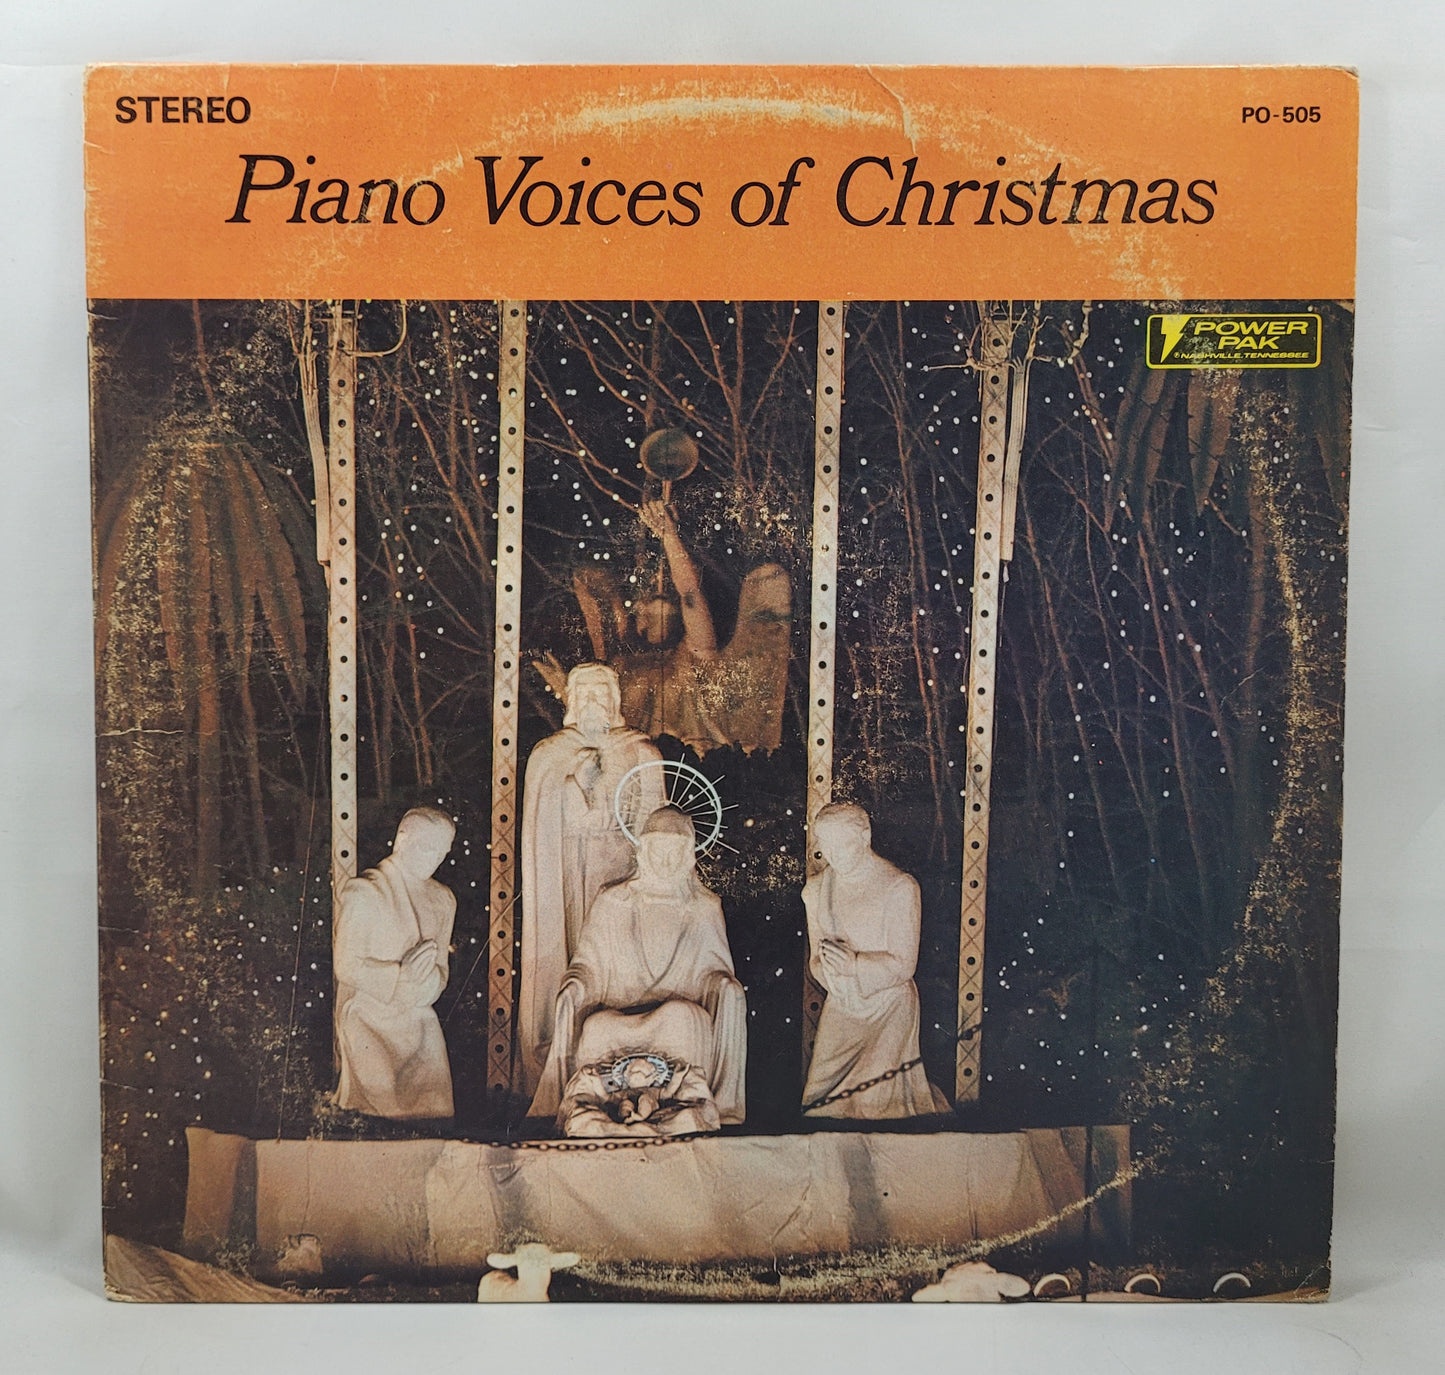 Willie Rainsford - Piano Voices of Christmas [1973 Used Vinyl Record LP]